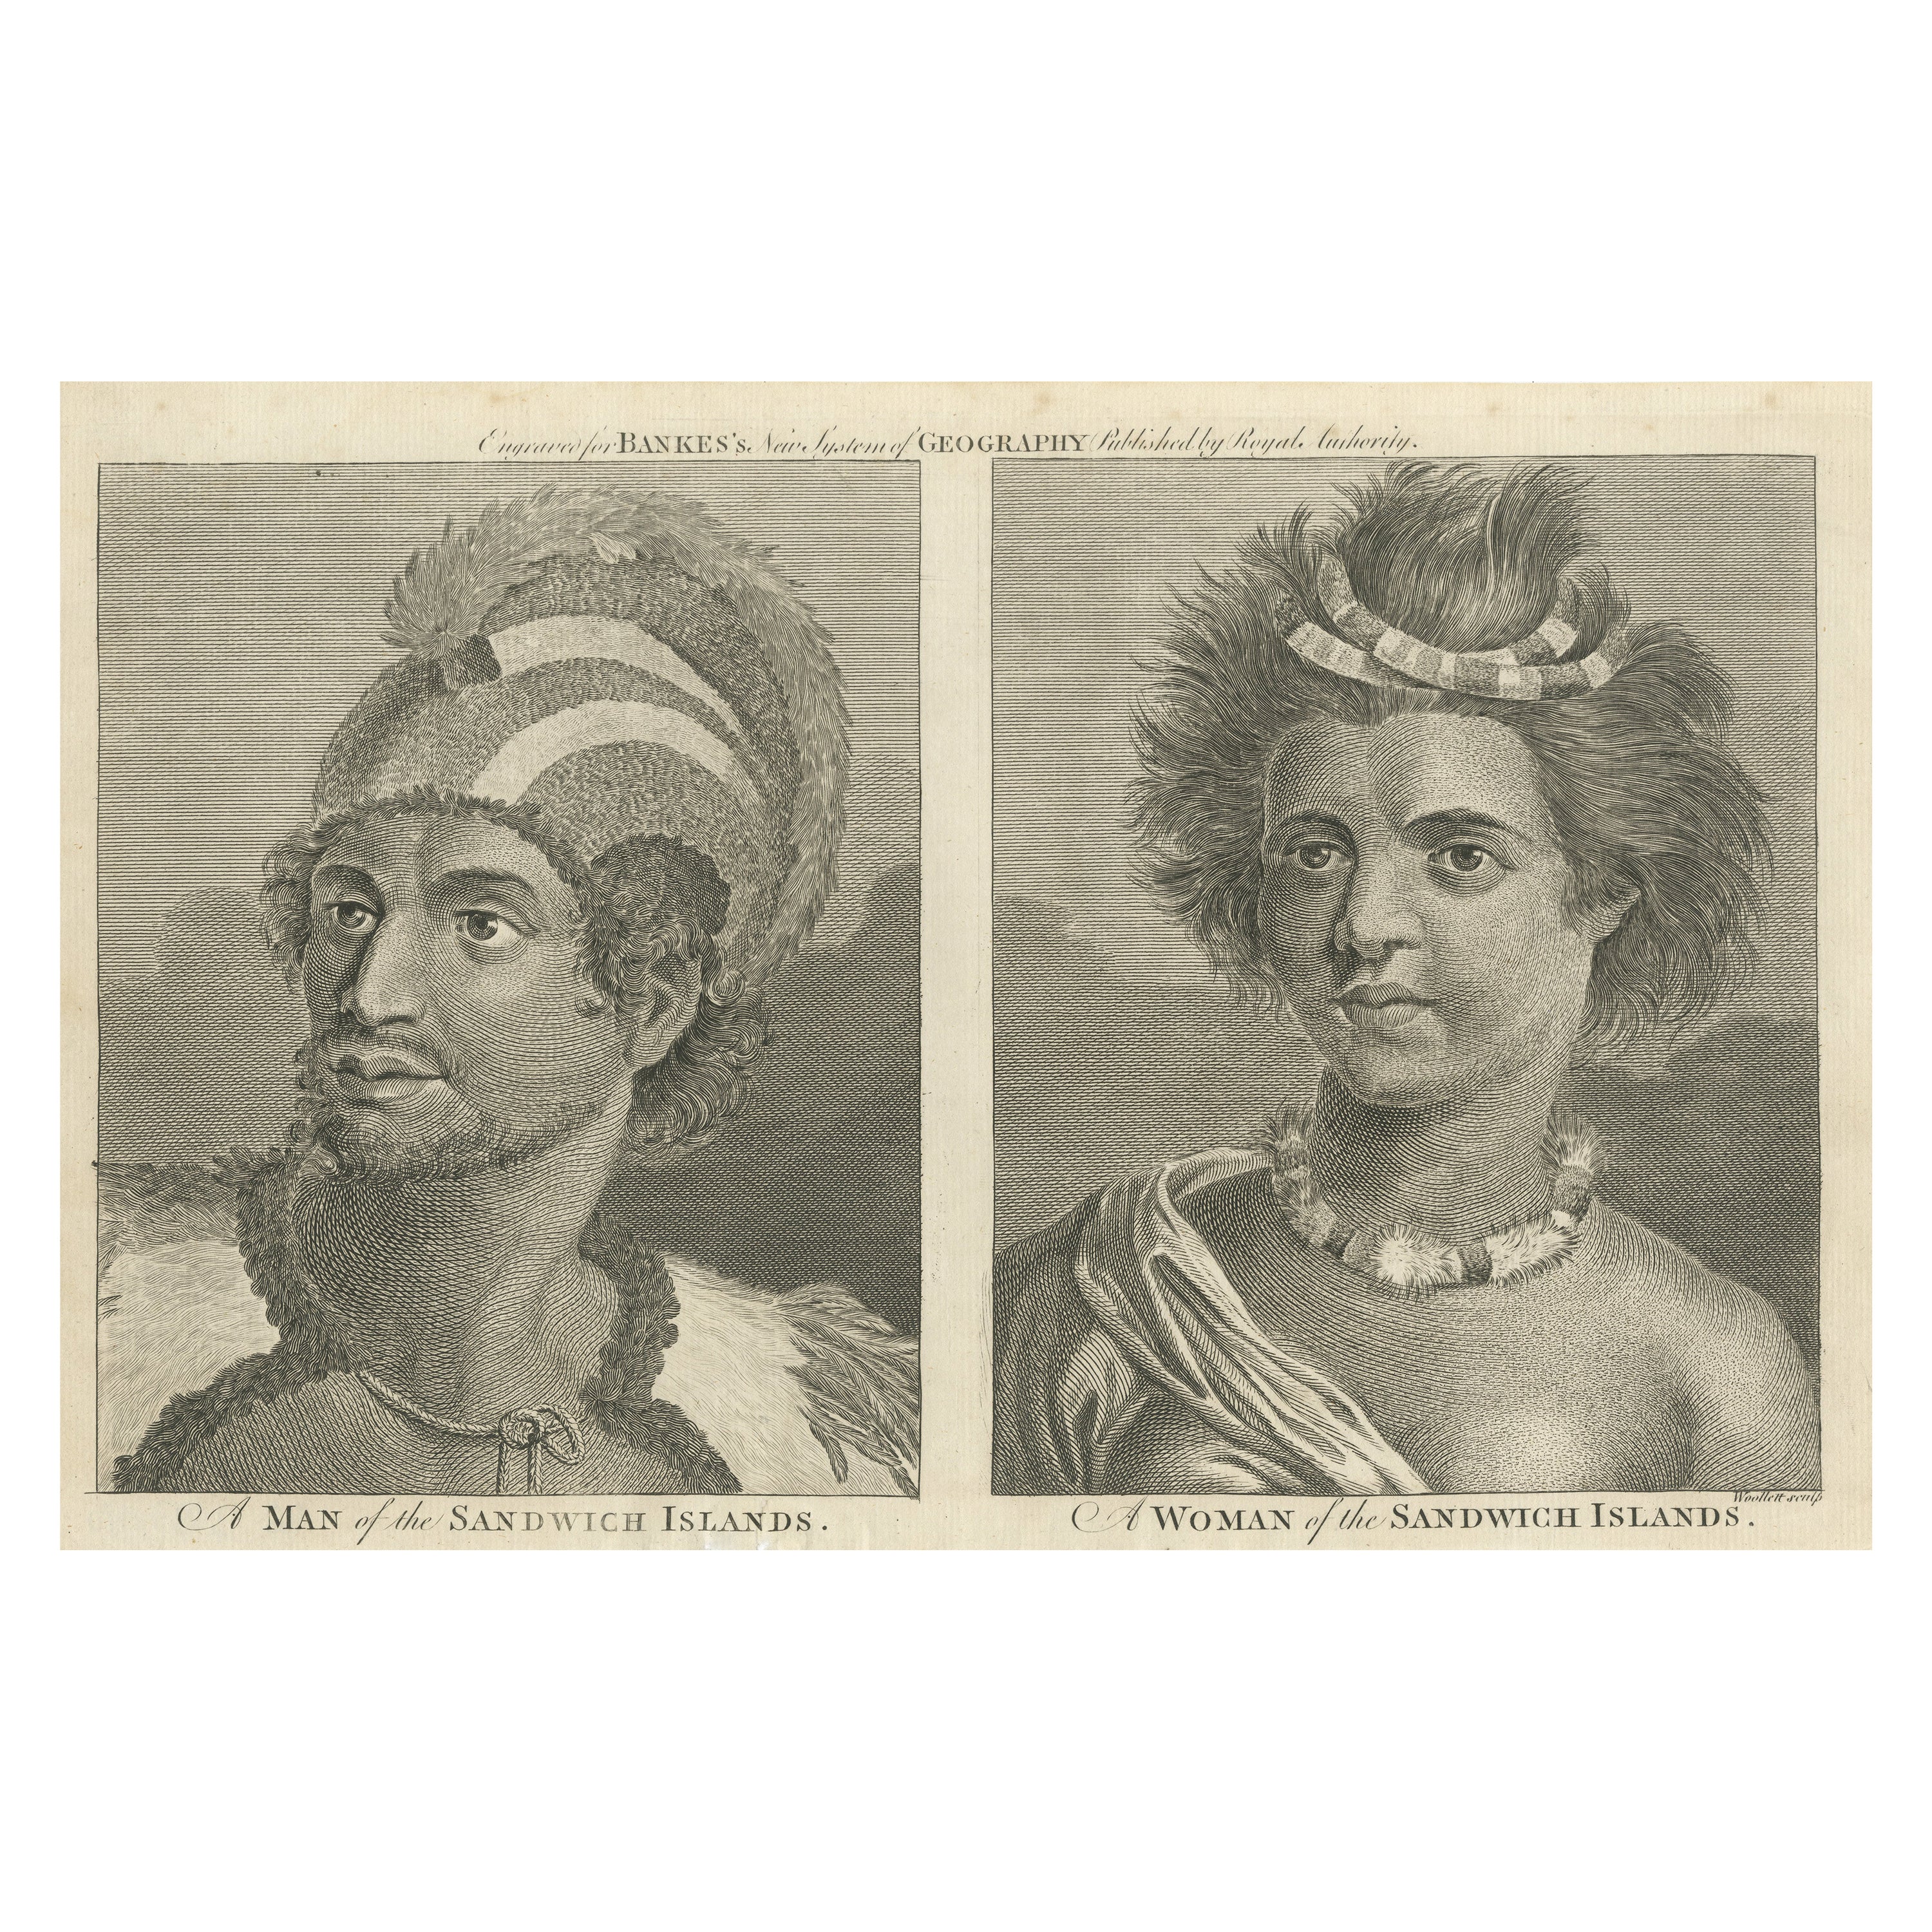 Portraits of Nobility from the Sandwich Islands (Hawaii), Published circa 1790